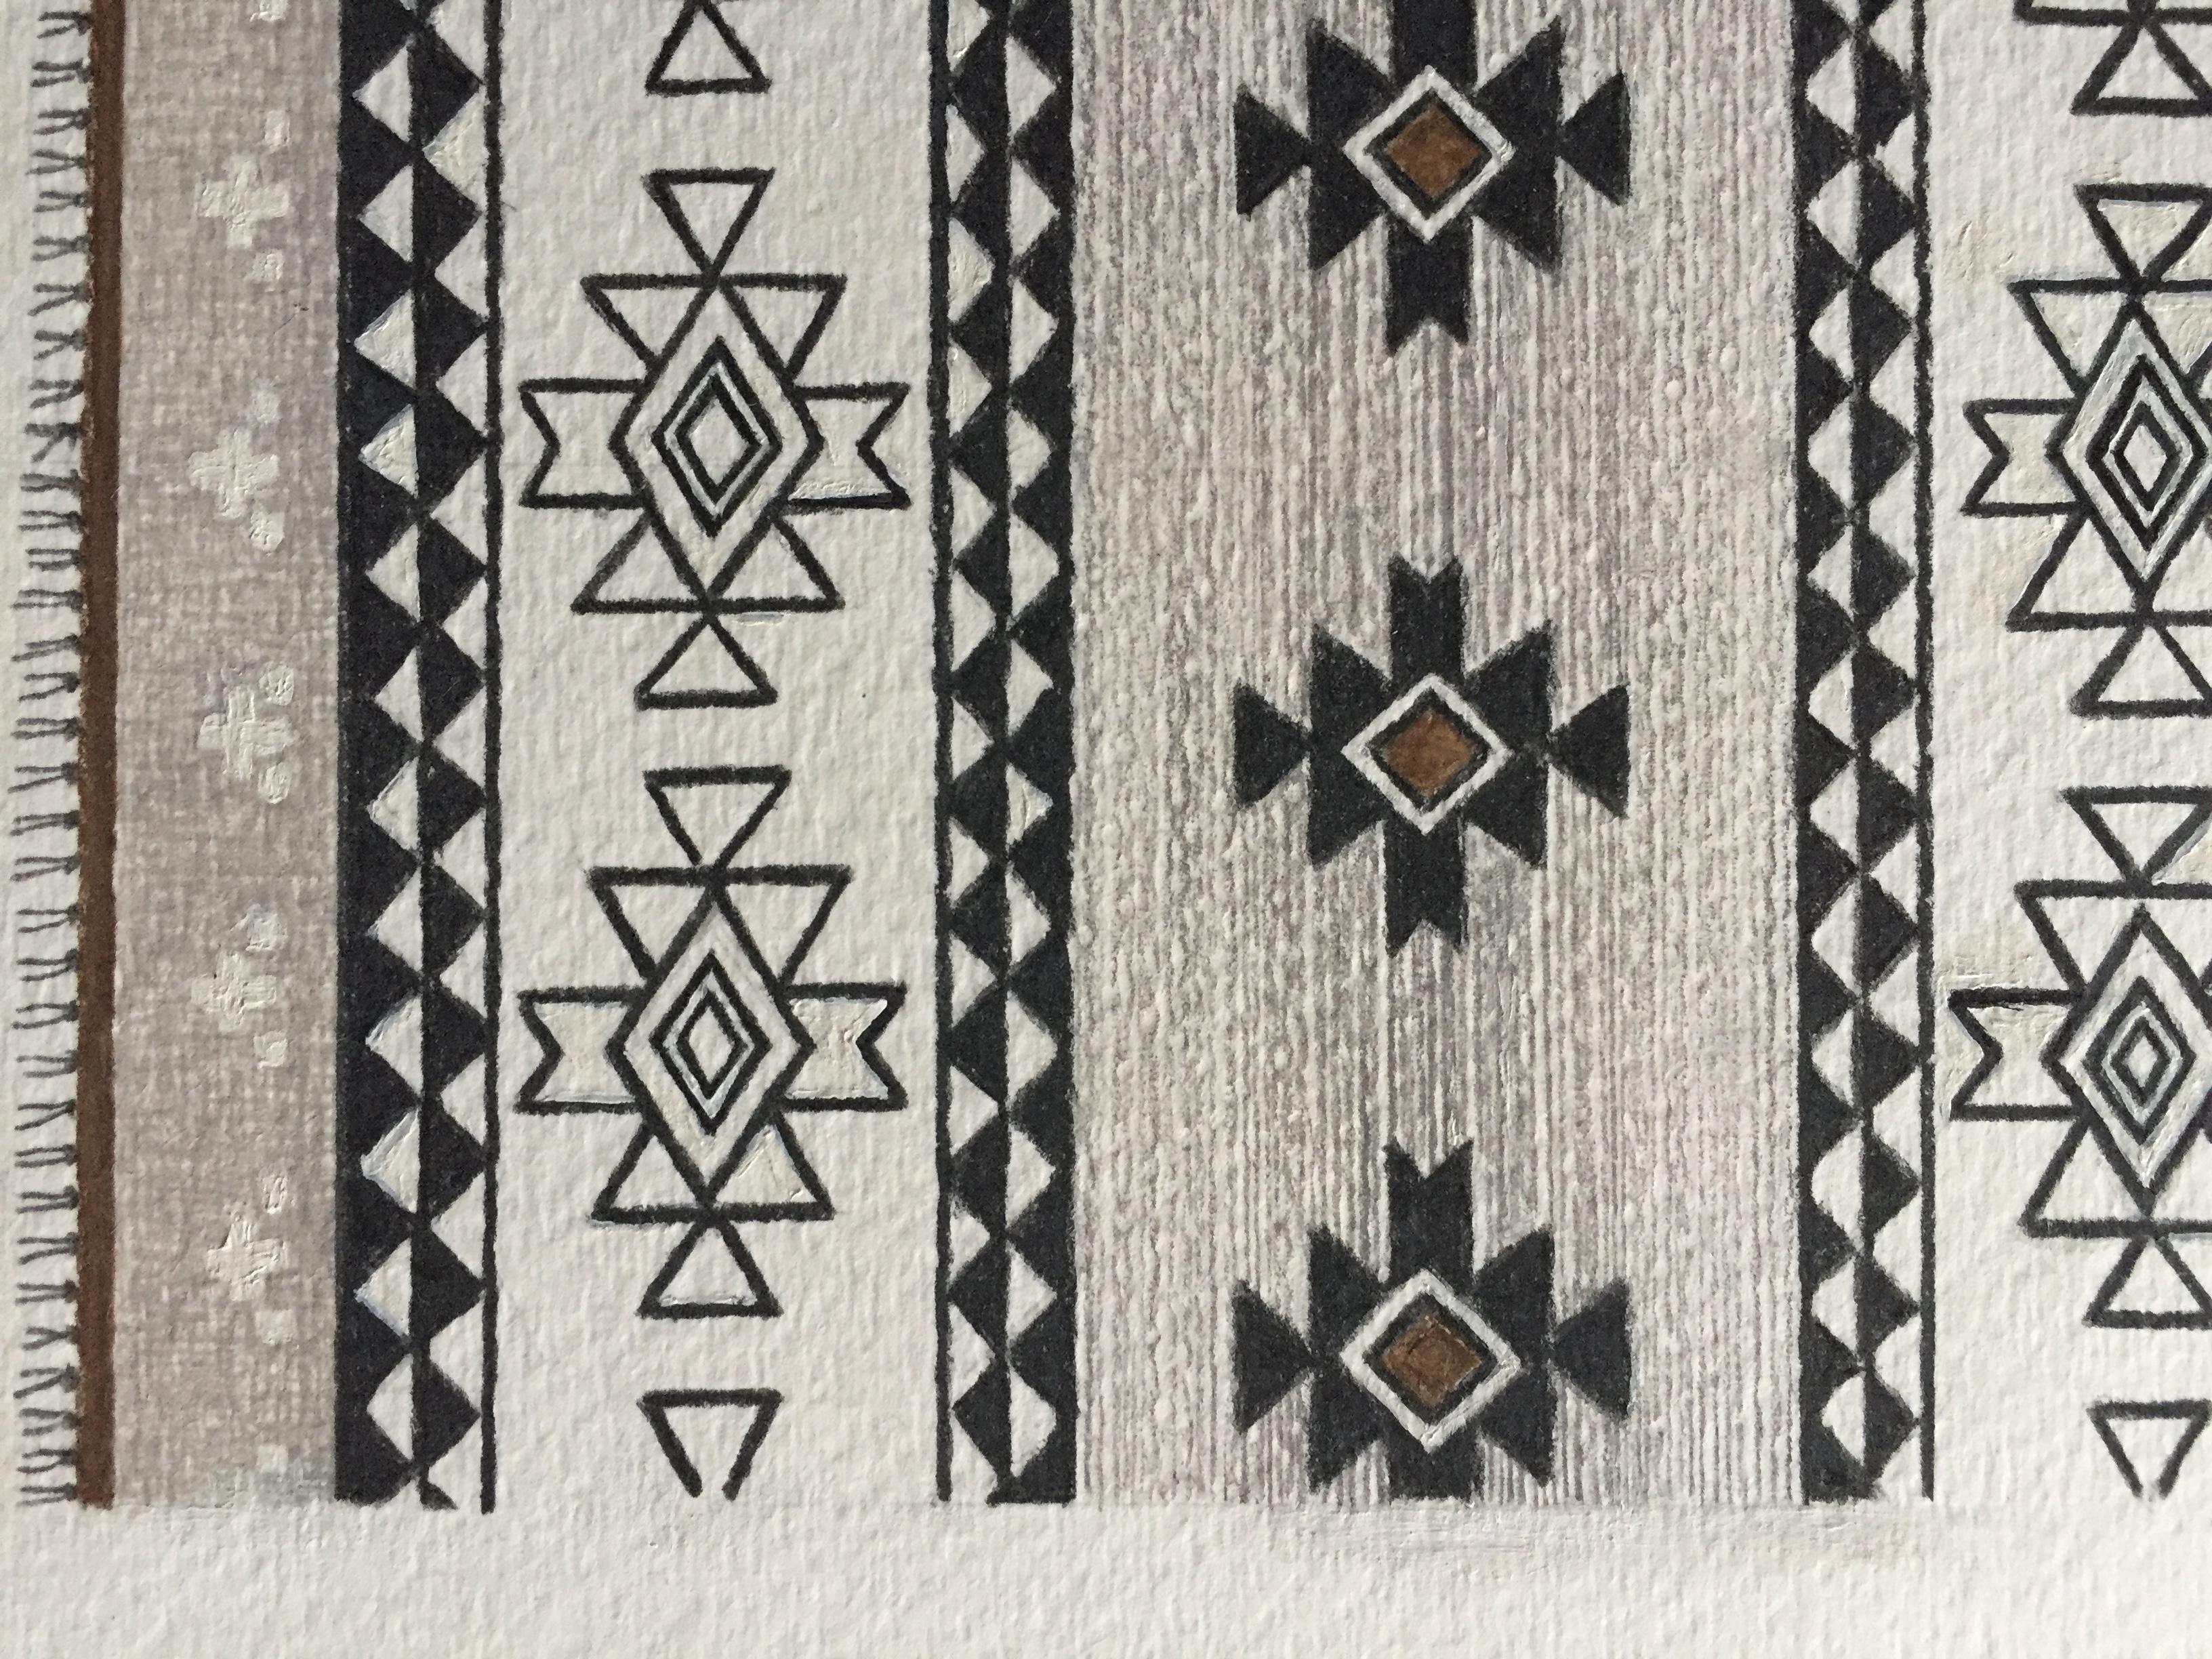 This detailed artwork on paper puts emphasis on design and composition. A Navajo inspired rug motif is created using traditional design elements with a contemporary outcome. Symmetry and geometric patterns represent balance, harmony, beauty and